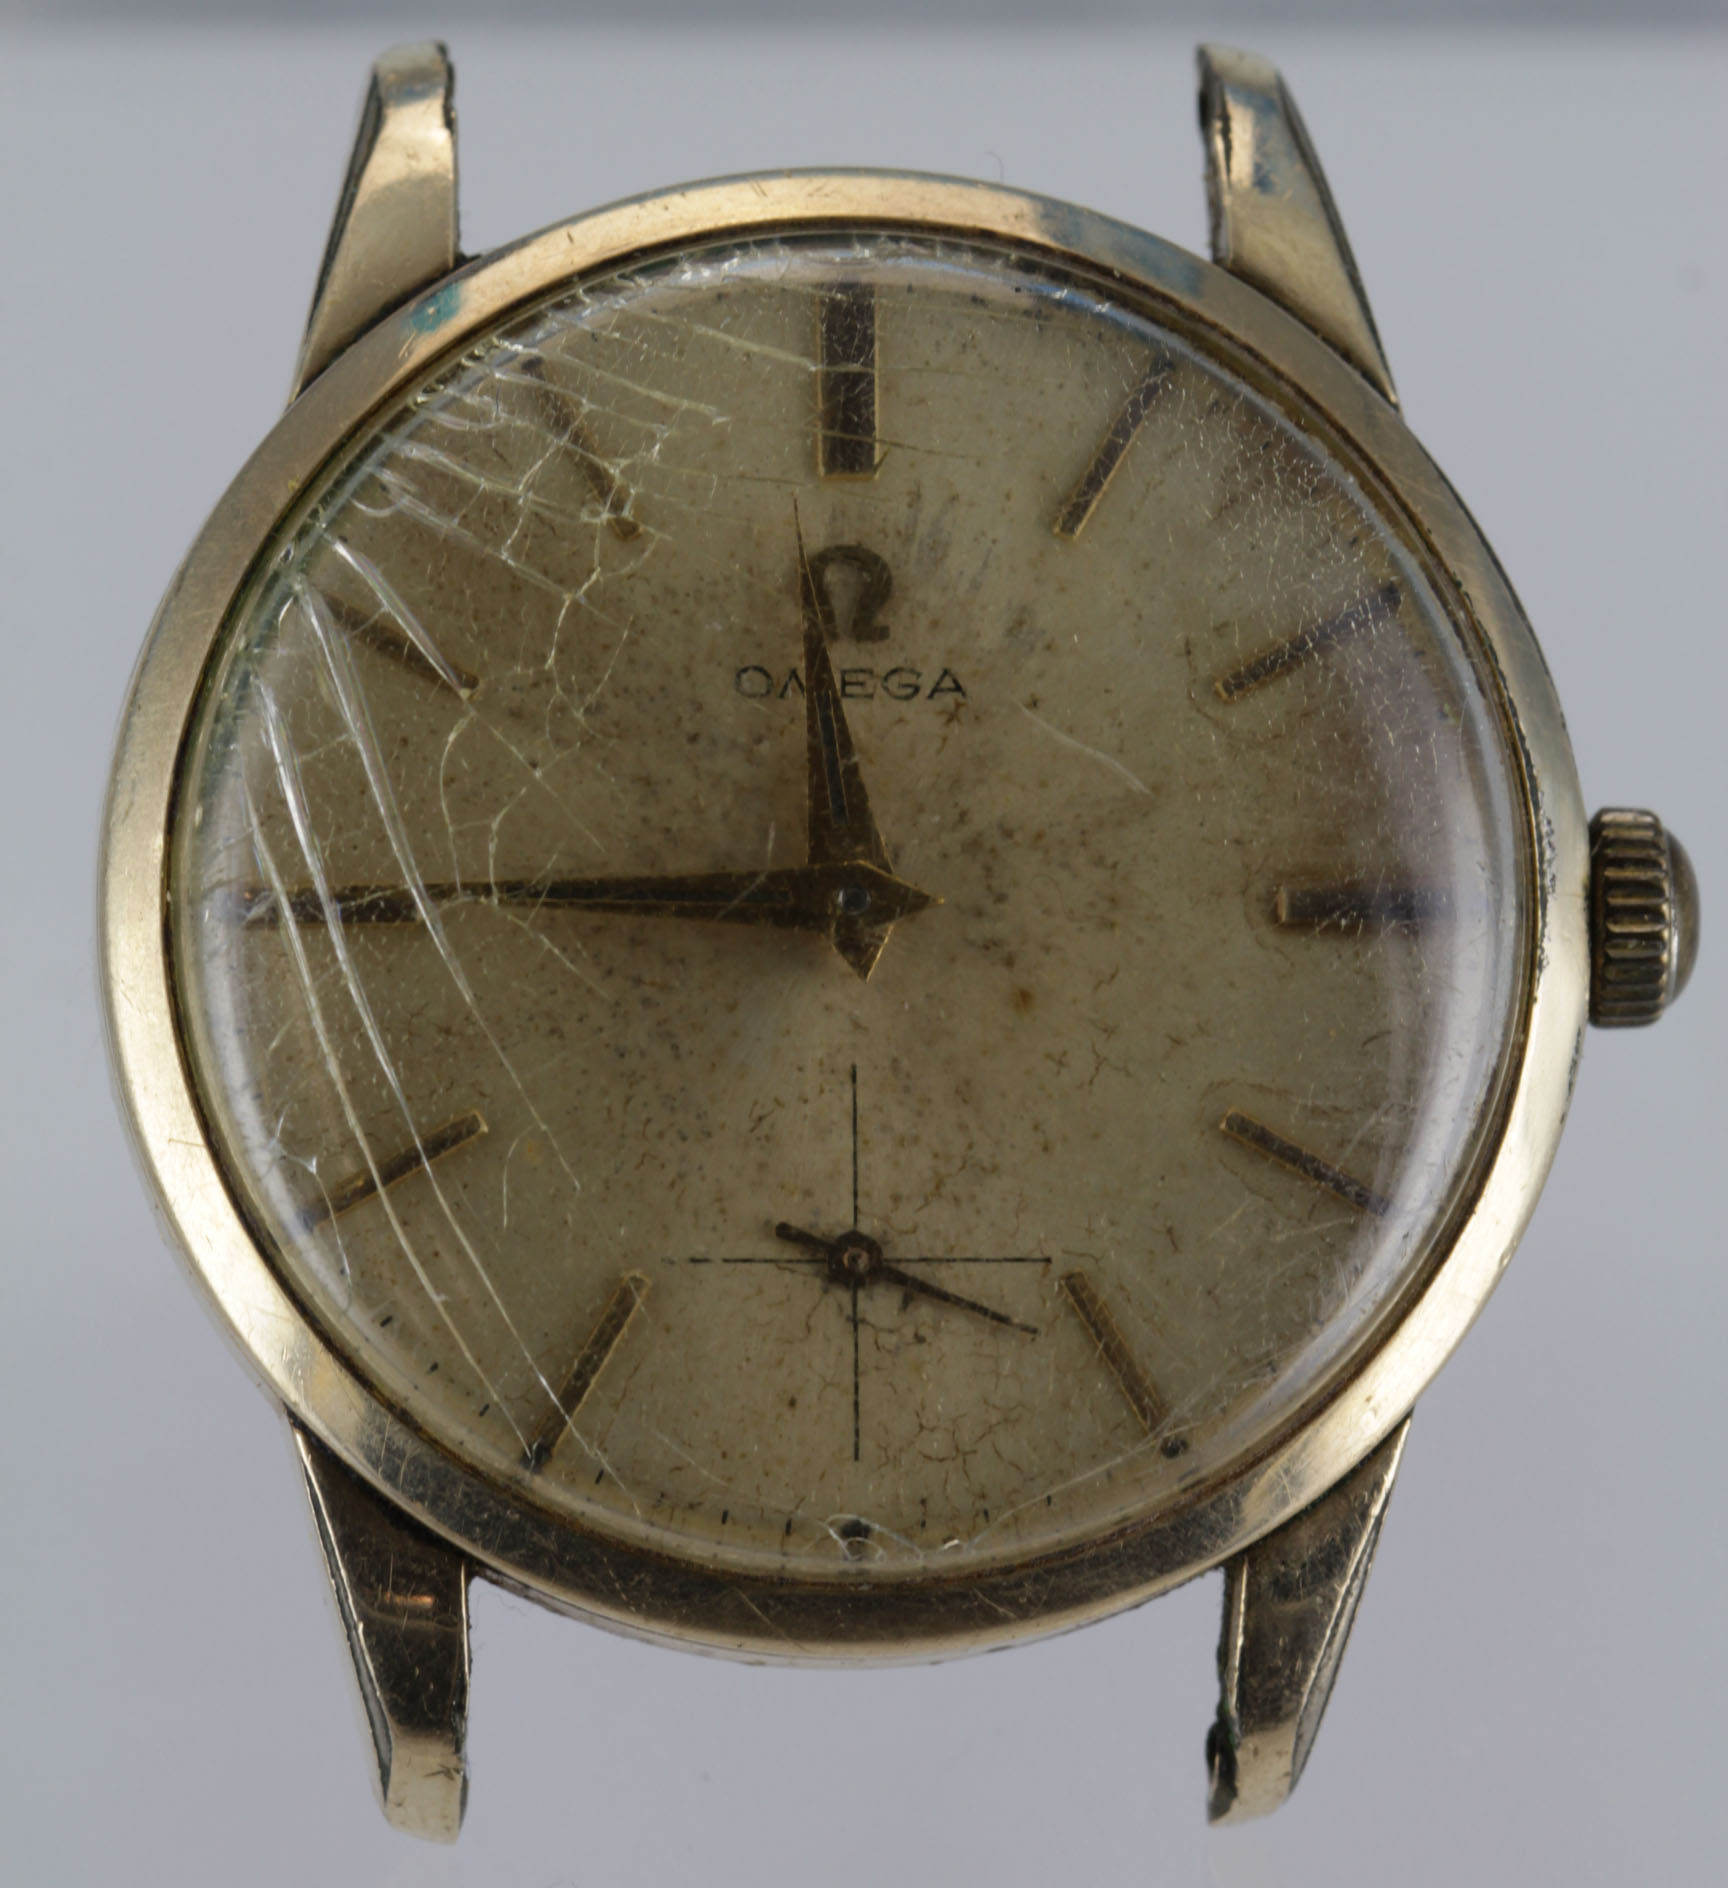 Gents Omega gold plated wristwatch circa 1954 (serial number 14561929). The gilt dial with gilt